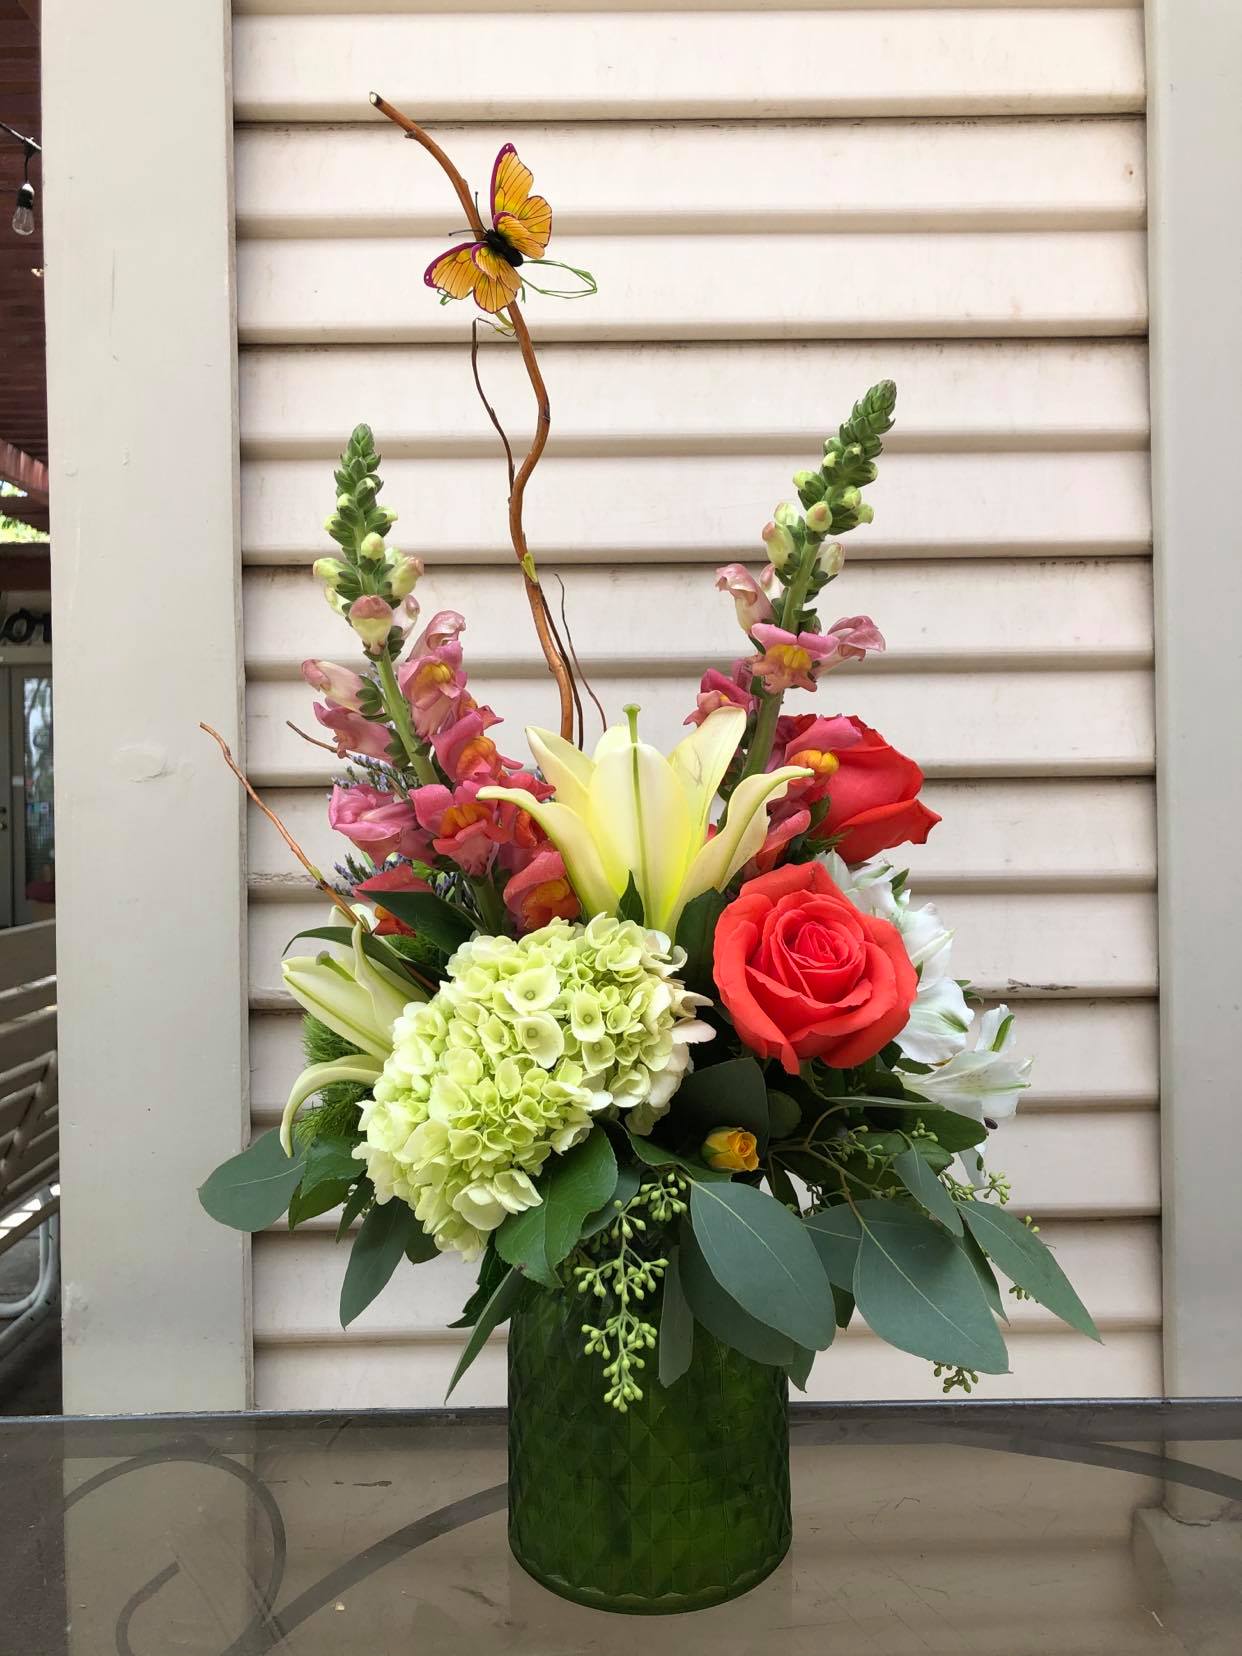 The Waverly - Snap dragons, roses, mini green hydrangea, alstroemeria and lilies with curly willow accents and a butterfly 